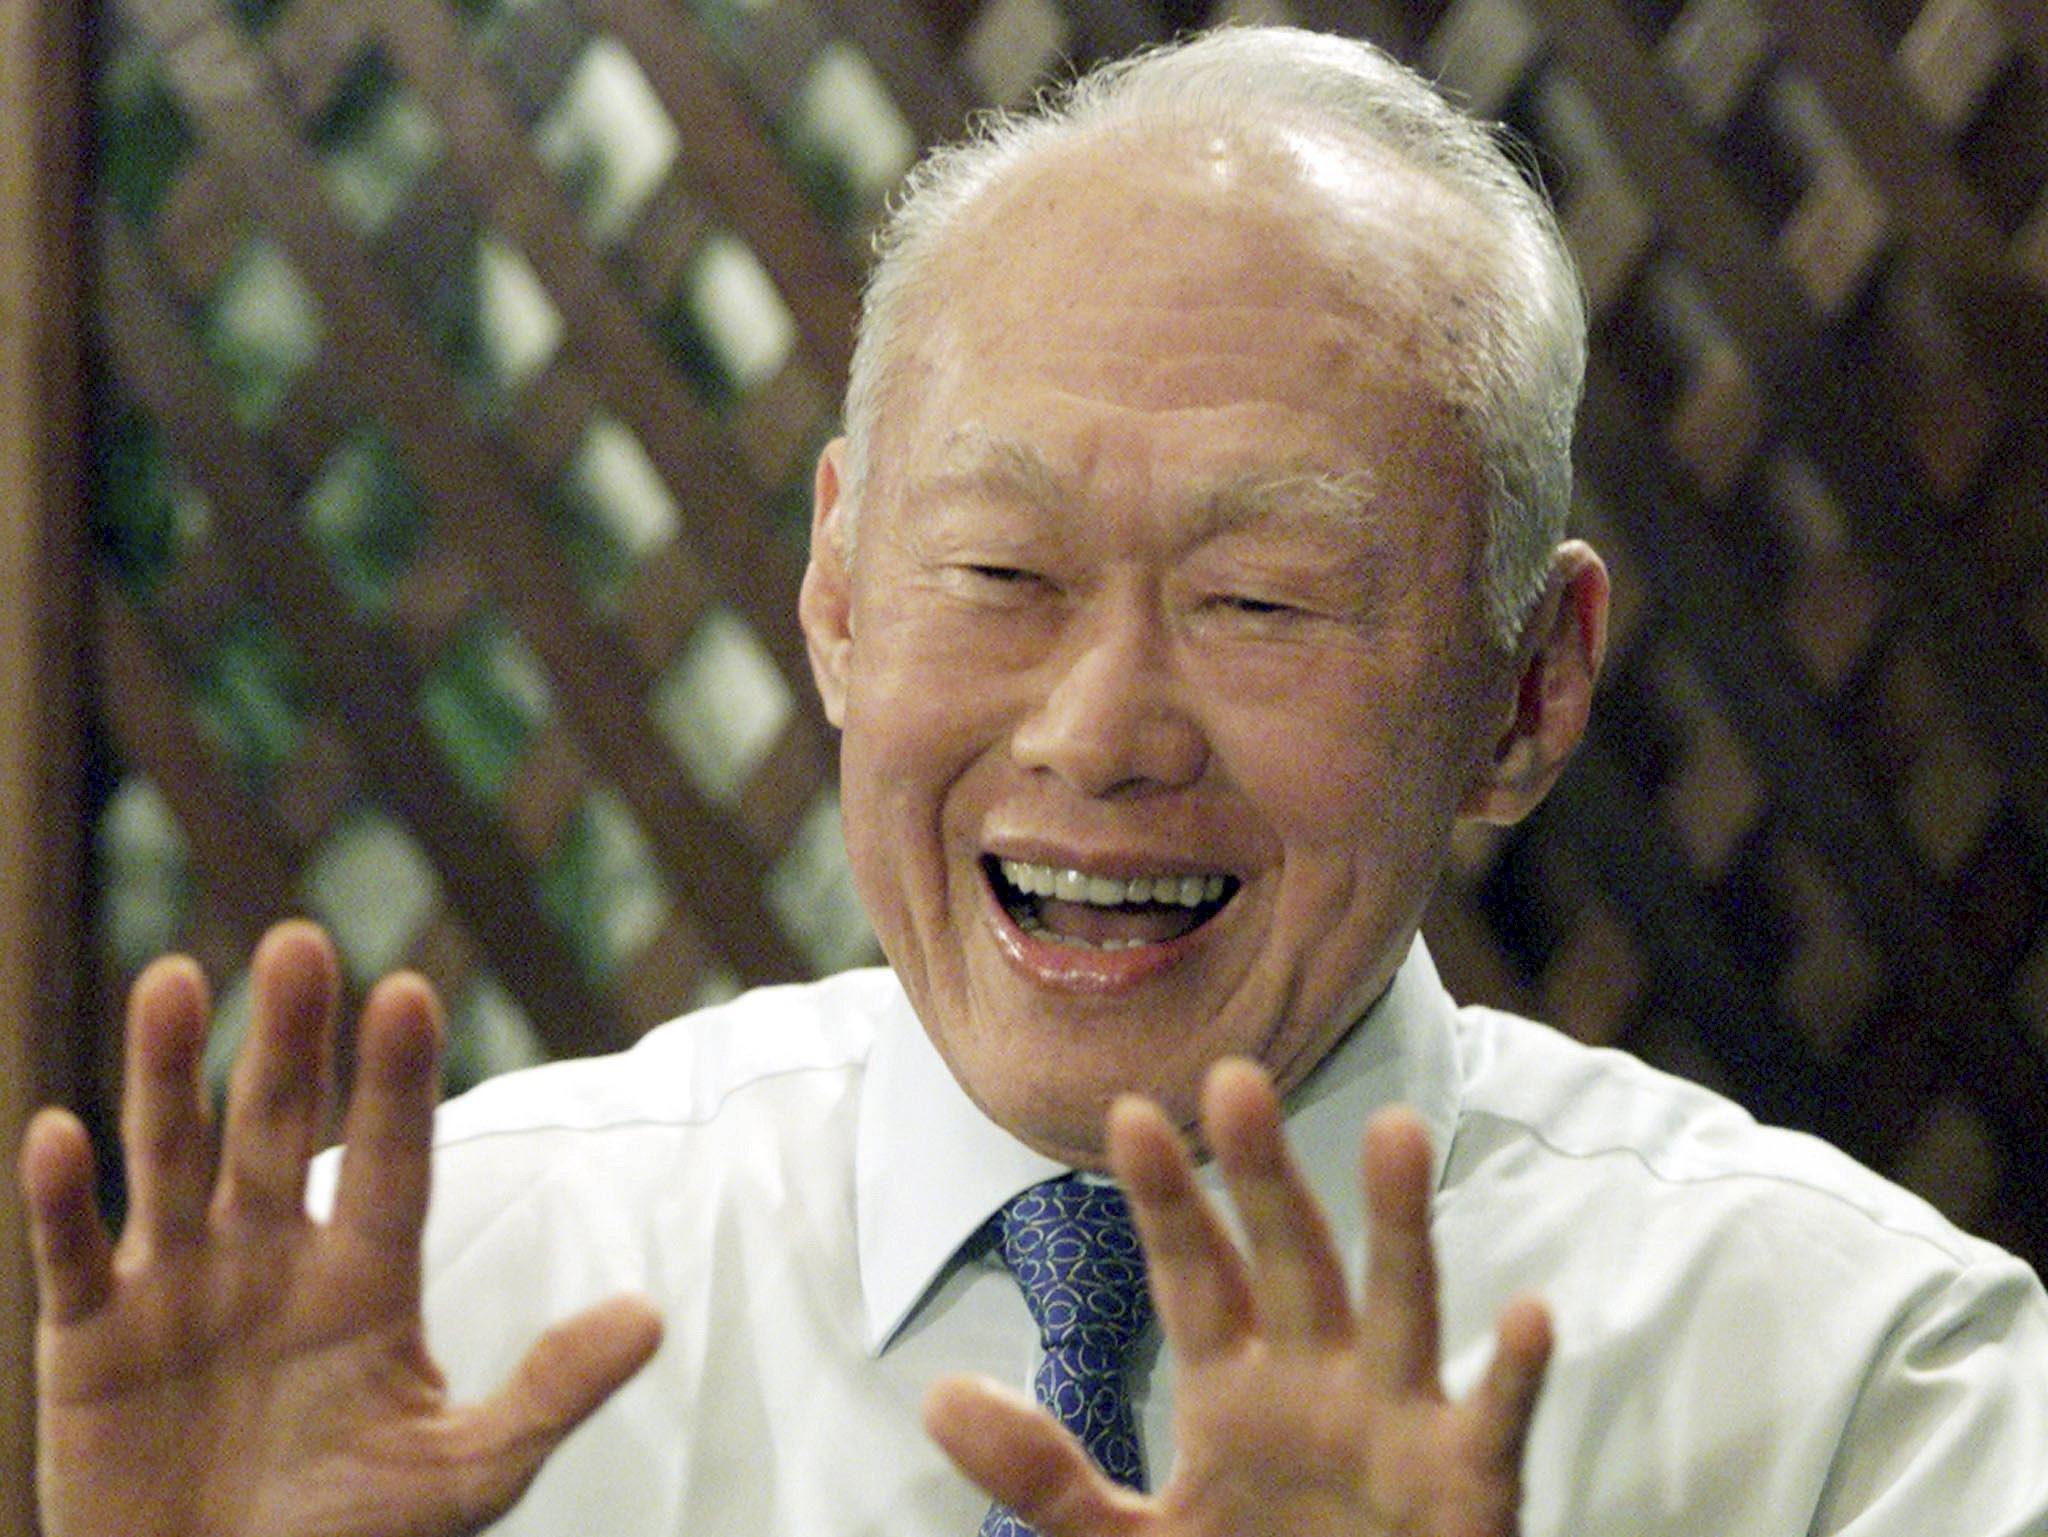 Modern Singapore's founding father, Lee Kuan Yew, dies at 91